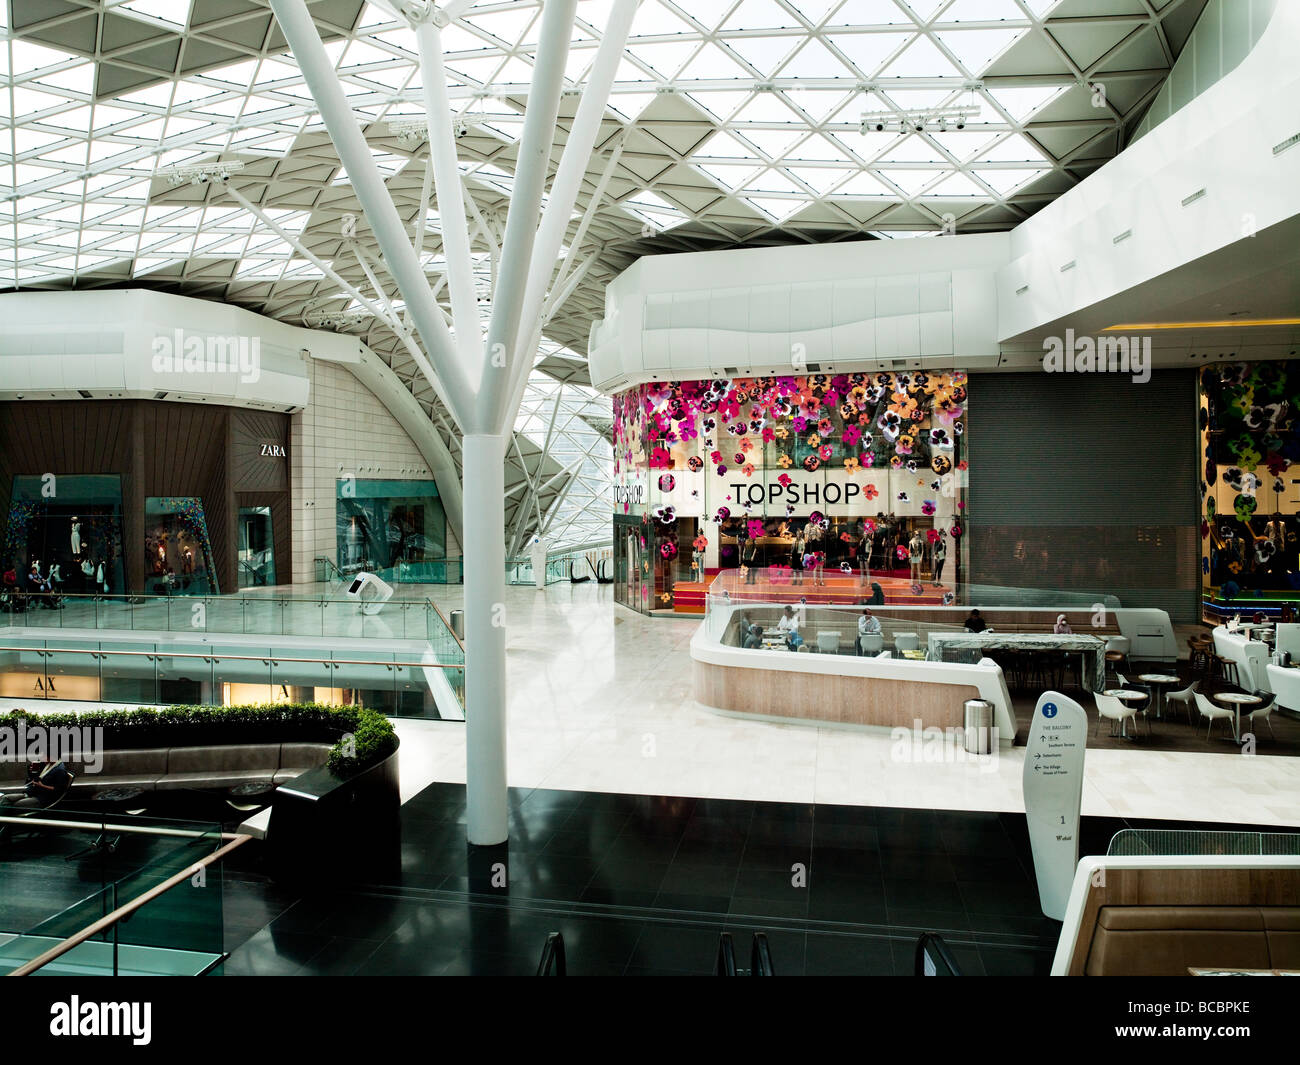 Empty Shopping Mall. Coronavirus, Covid-19, Social distancing, 'safety first', Stock Photo